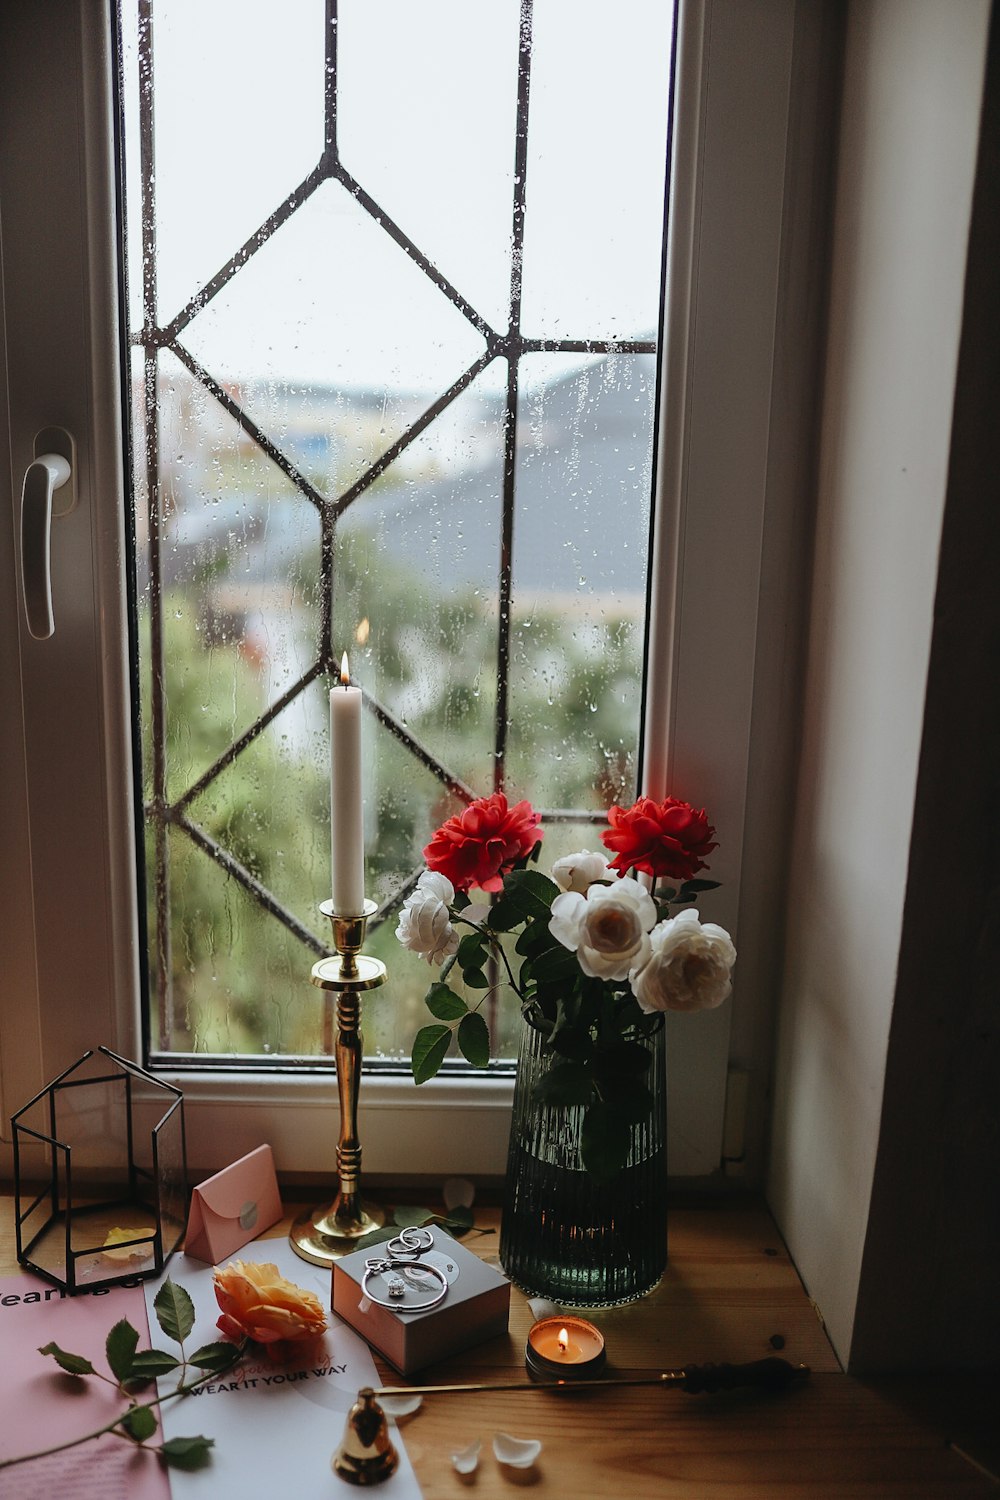 red and white roses in vase on table